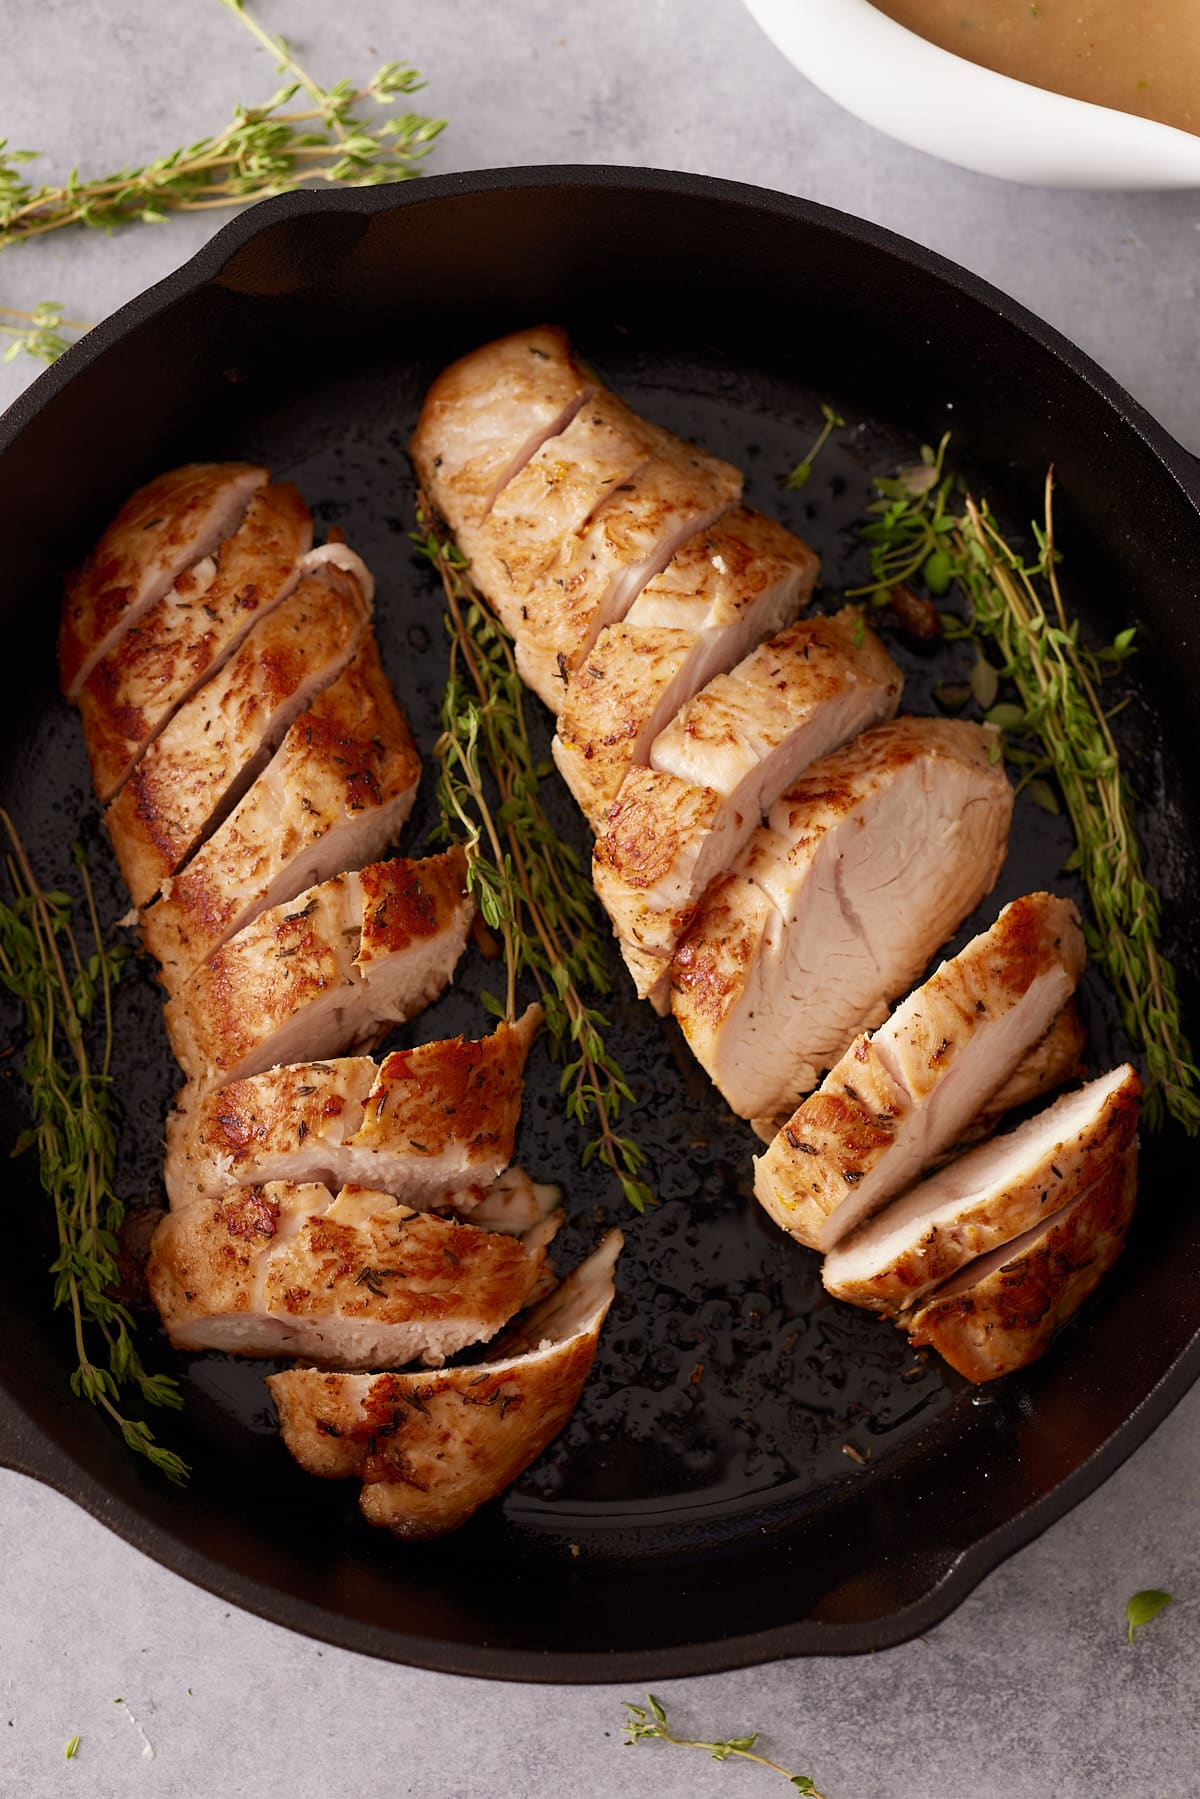 Top down image of cast iron skillet containing two cooked and sliced turkey tenderloins and sprigs of fresh thyme